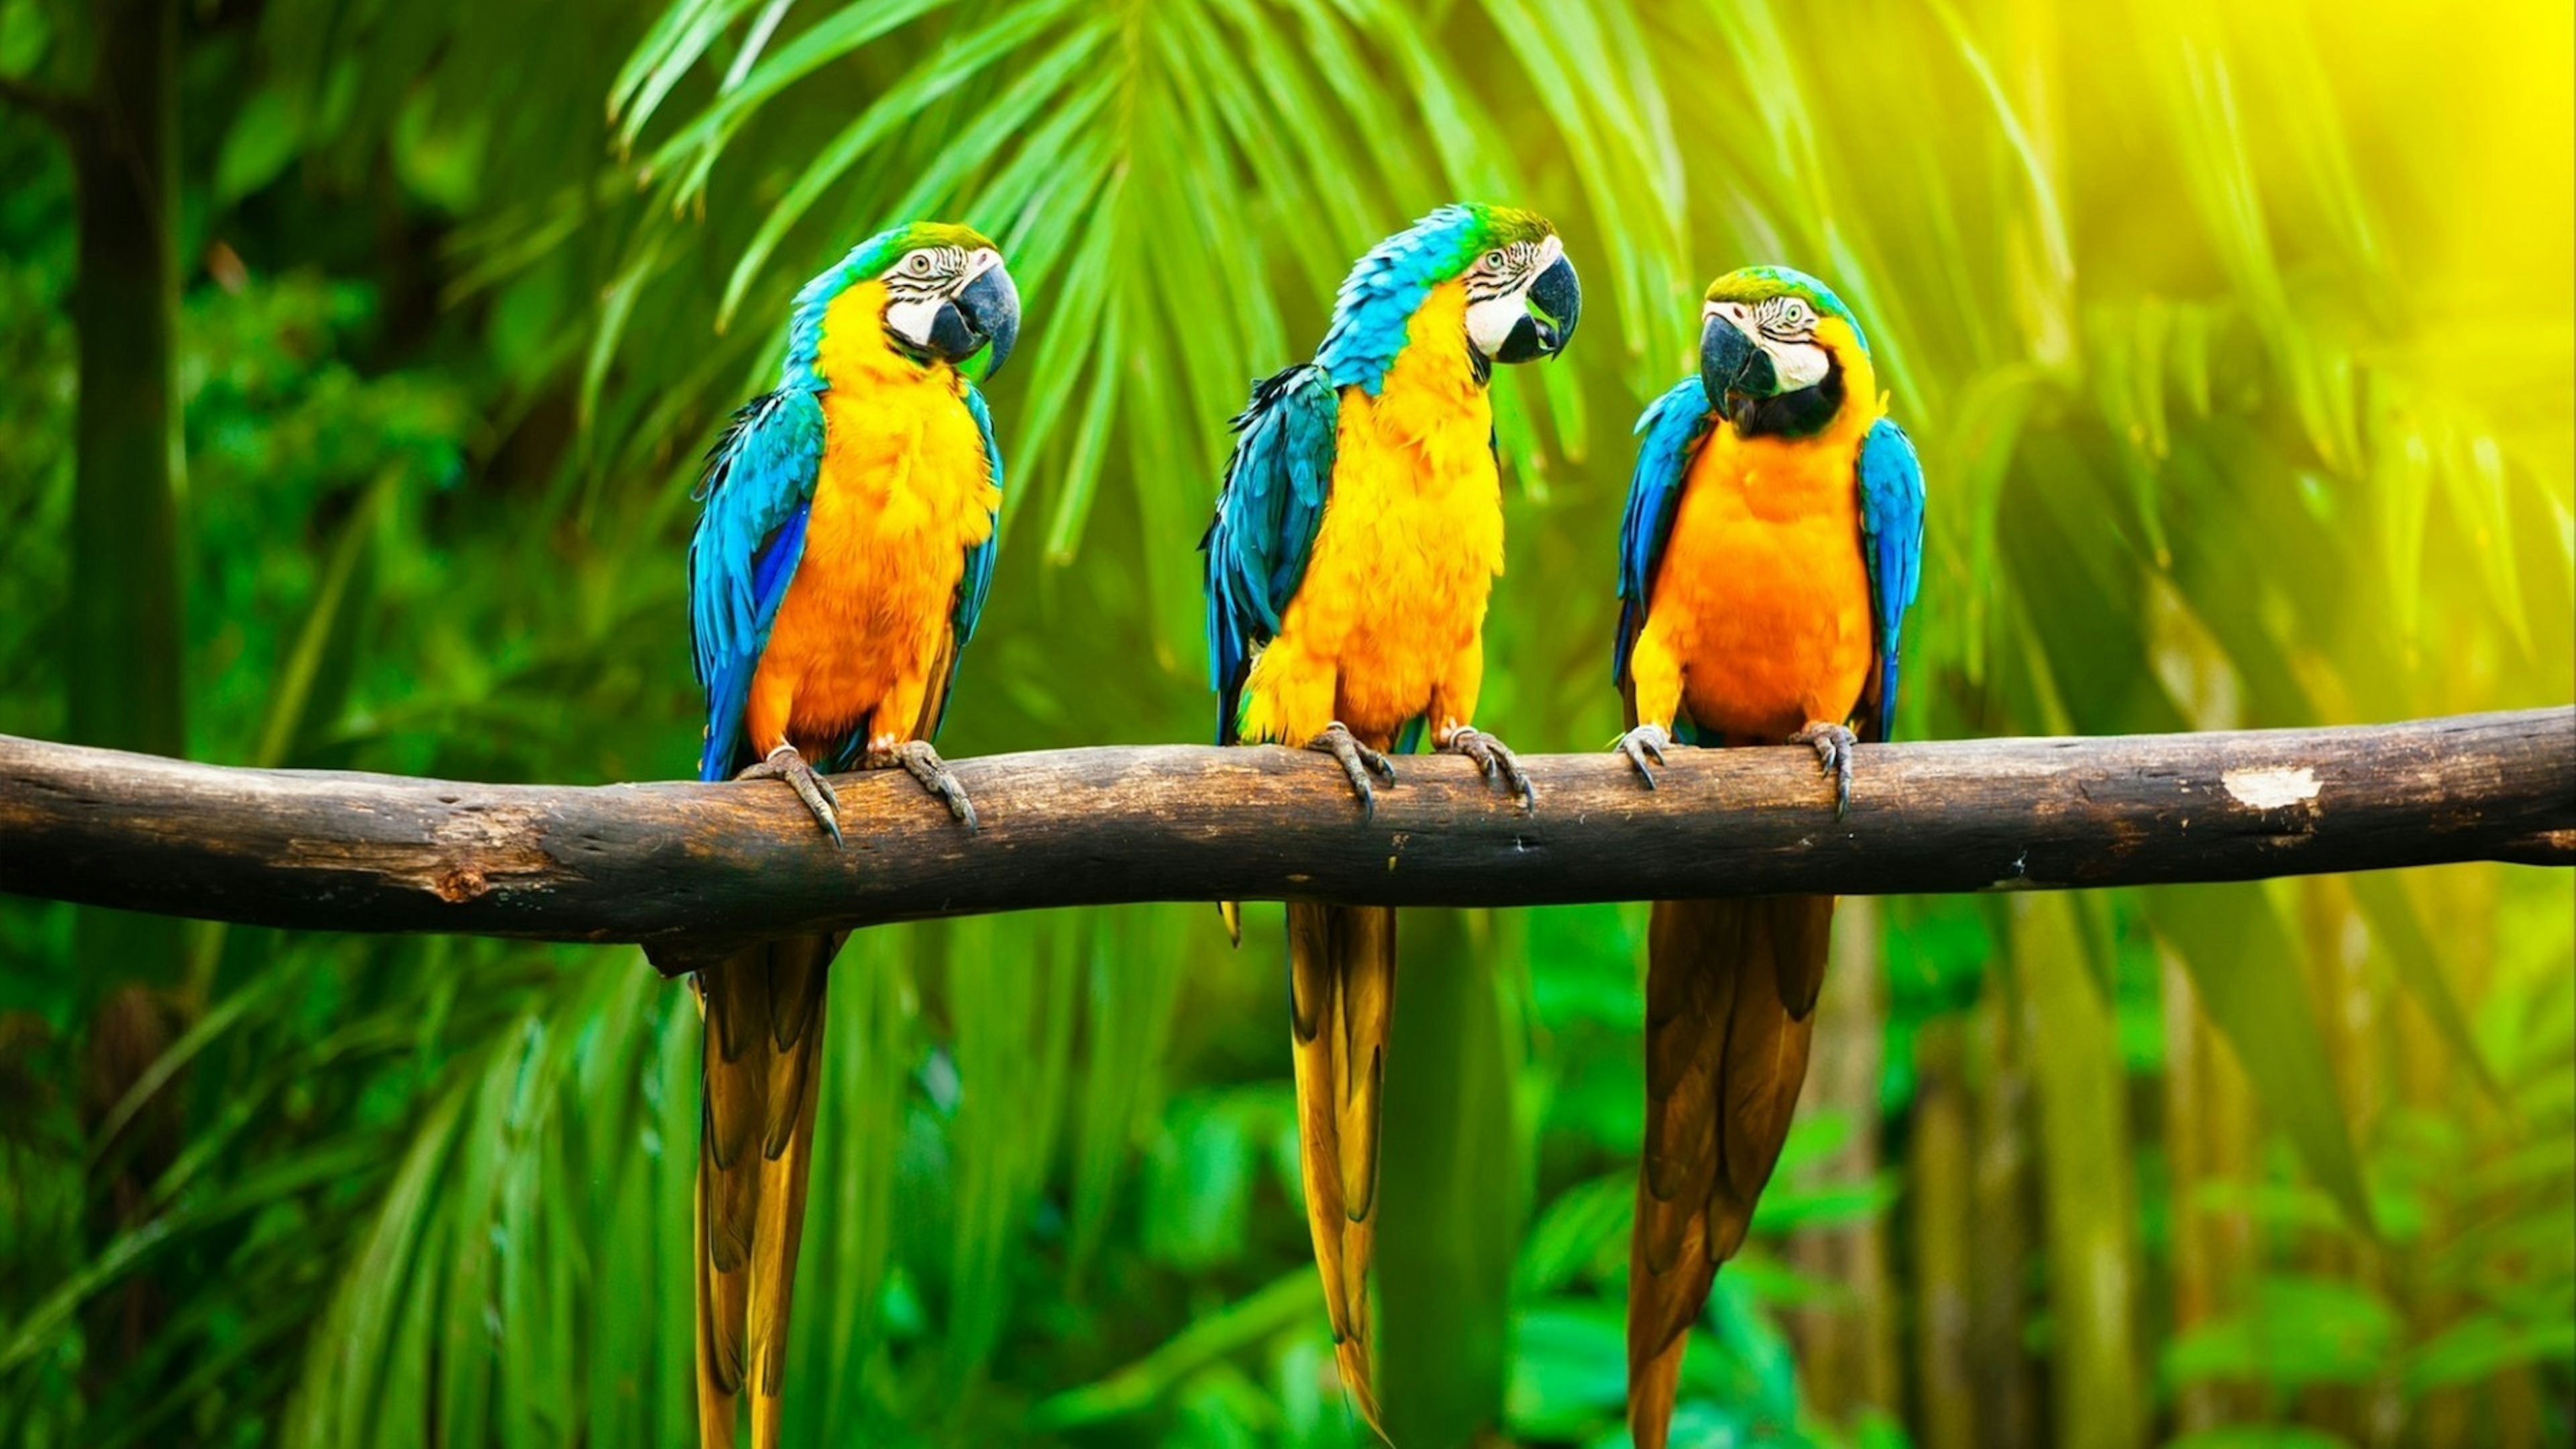 Blue-and-Yellow Macaw (Ara ararauna), also known as the Blue-and-Gold Macaw